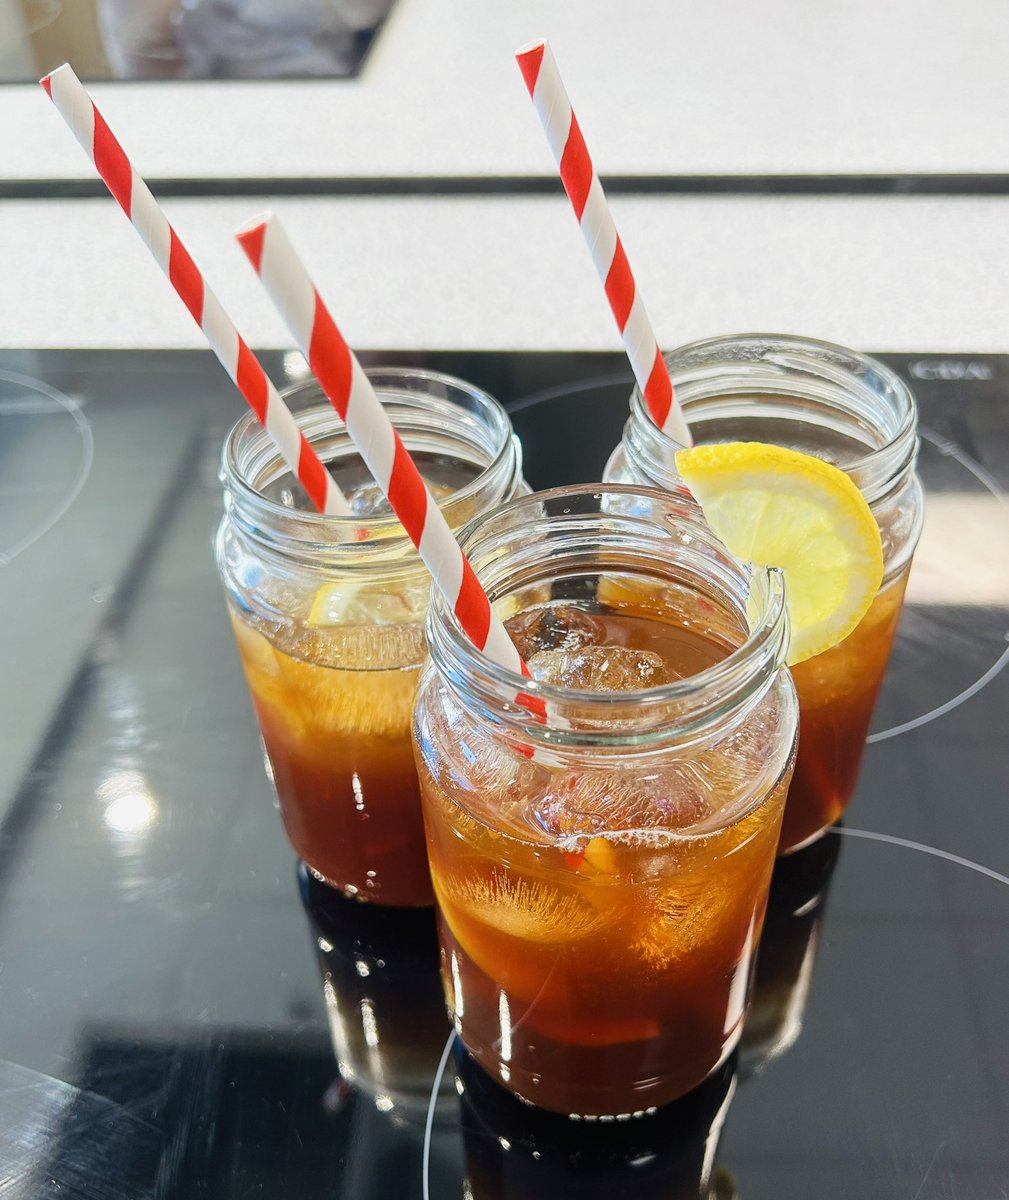 Some delicious lemon iced tea made by our new fabulous Barista class. Just what everyone needed on such a glorious day! @LossieHigh @DYWMoray @EducationMoray